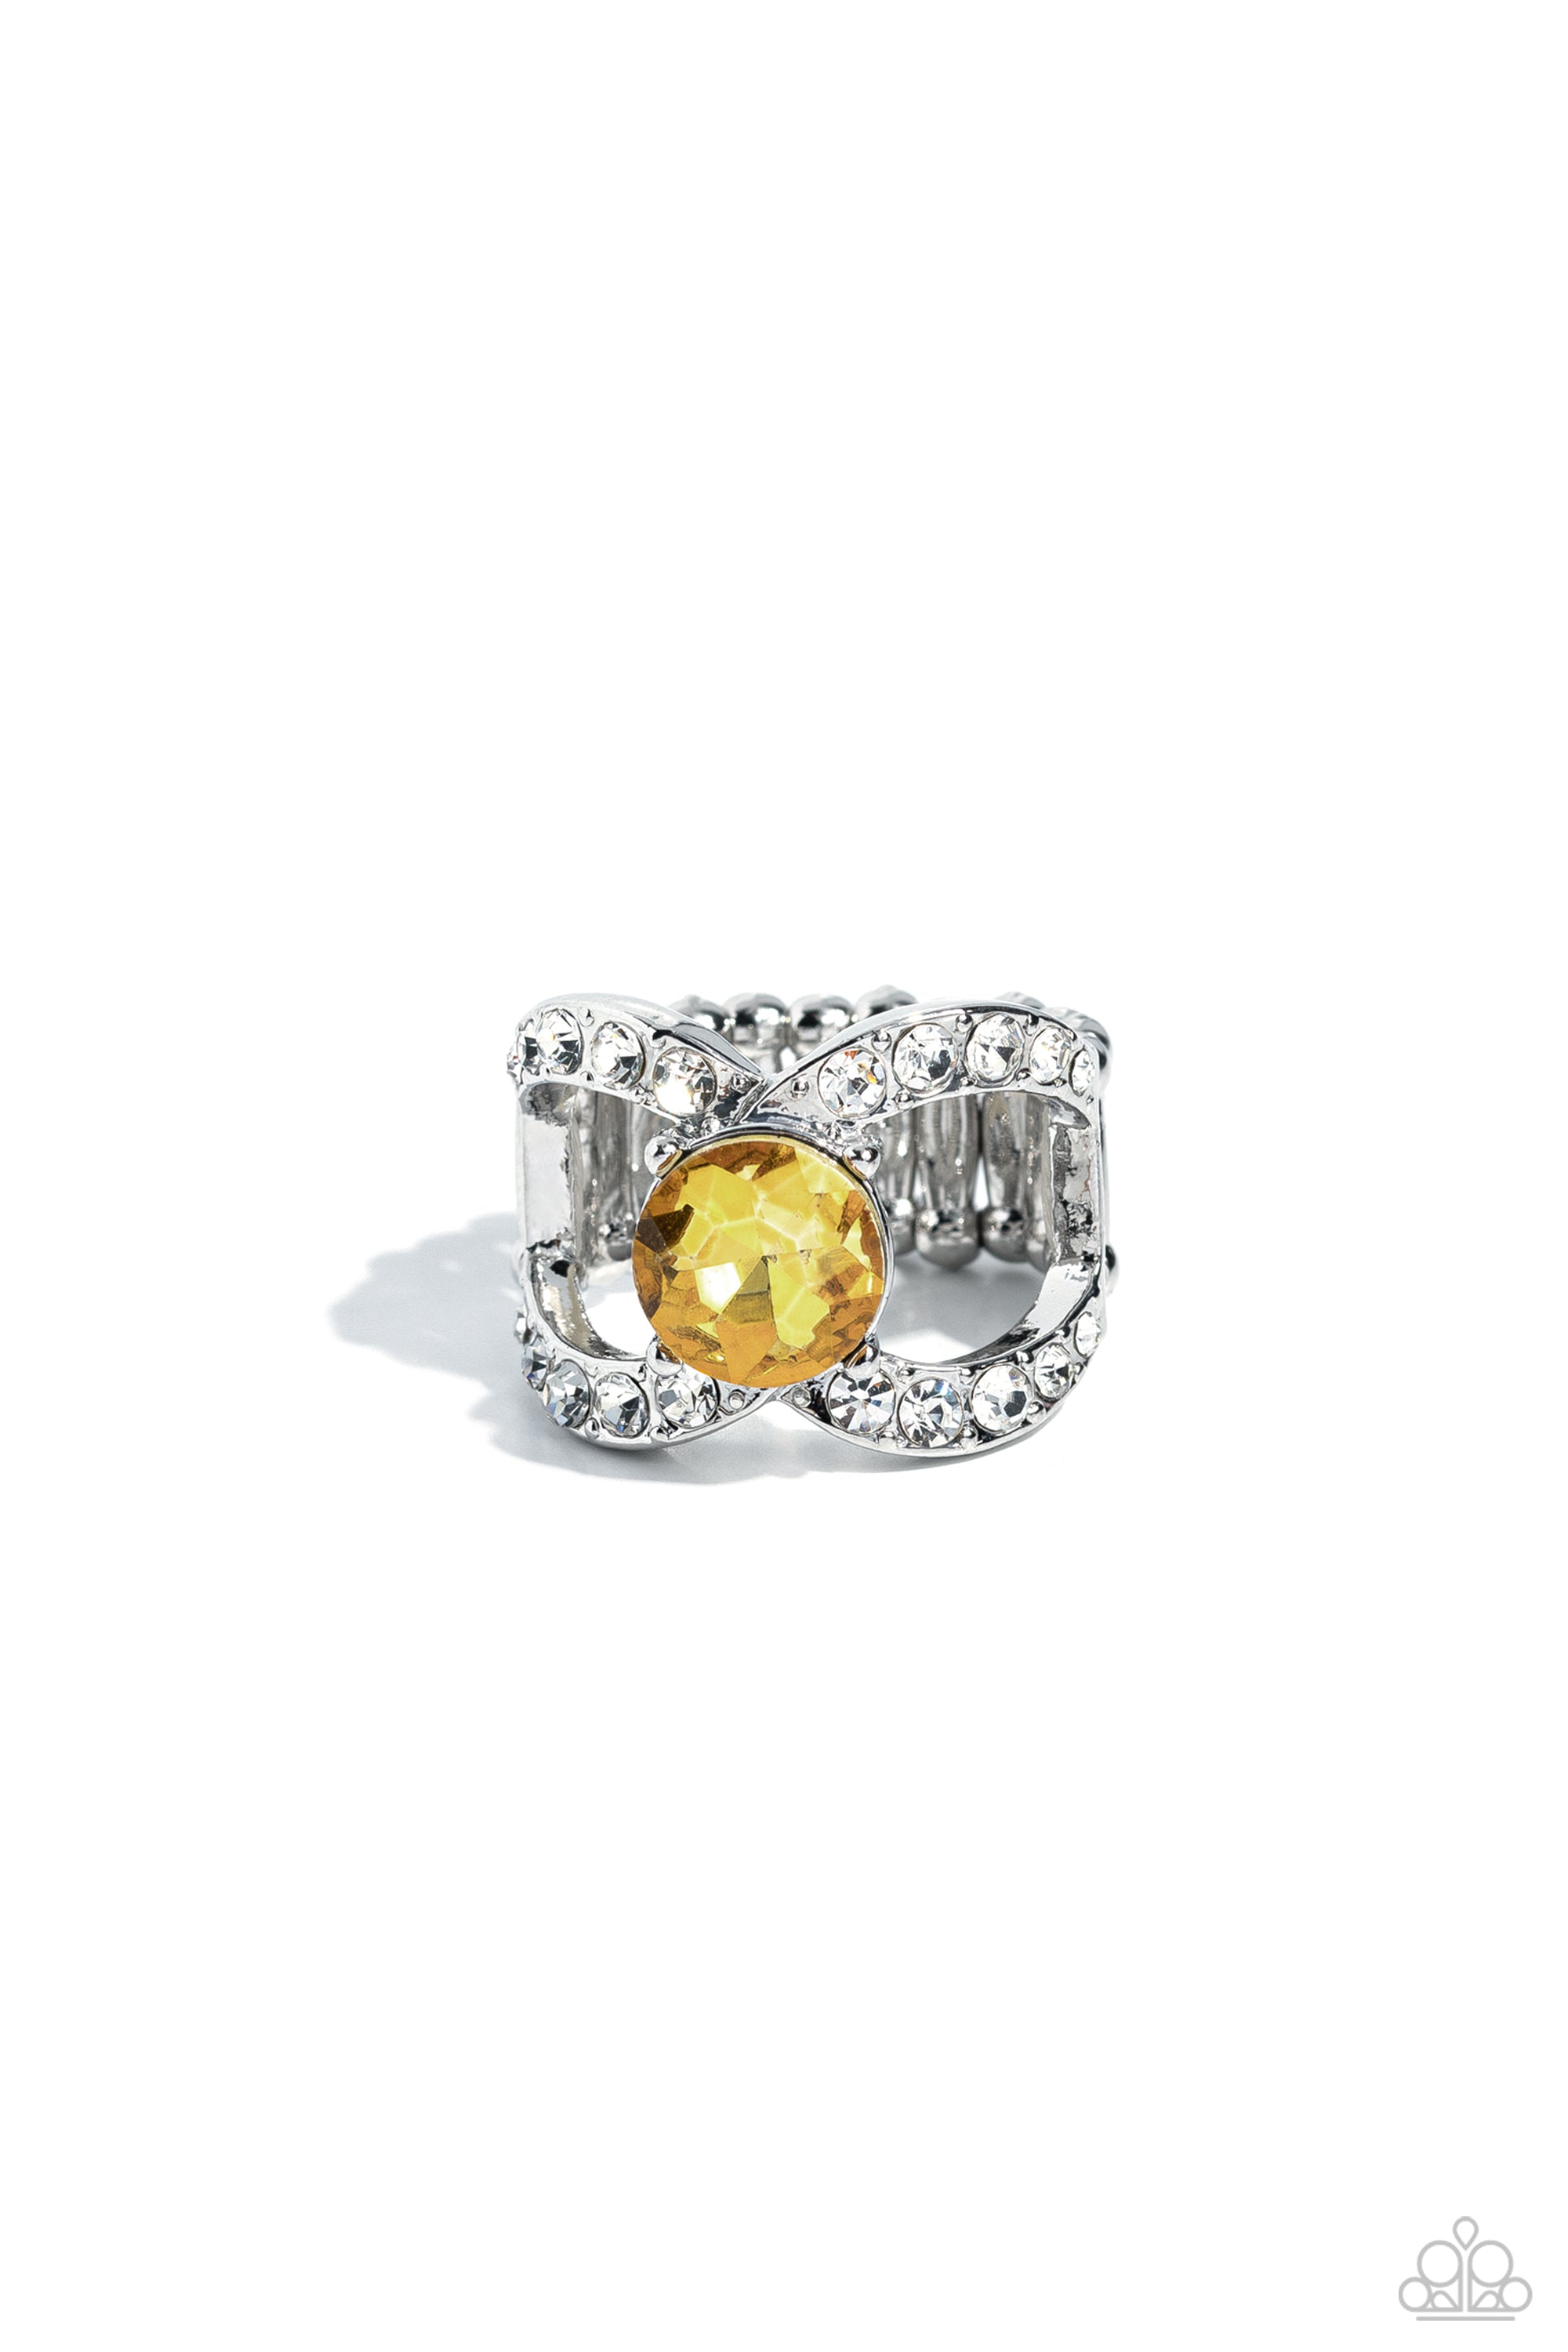 Bow Chicka Bow Wow Yellow Rhinestone Ring - Paparazzi Accessories- lightbox - CarasShop.com - $5 Jewelry by Cara Jewels